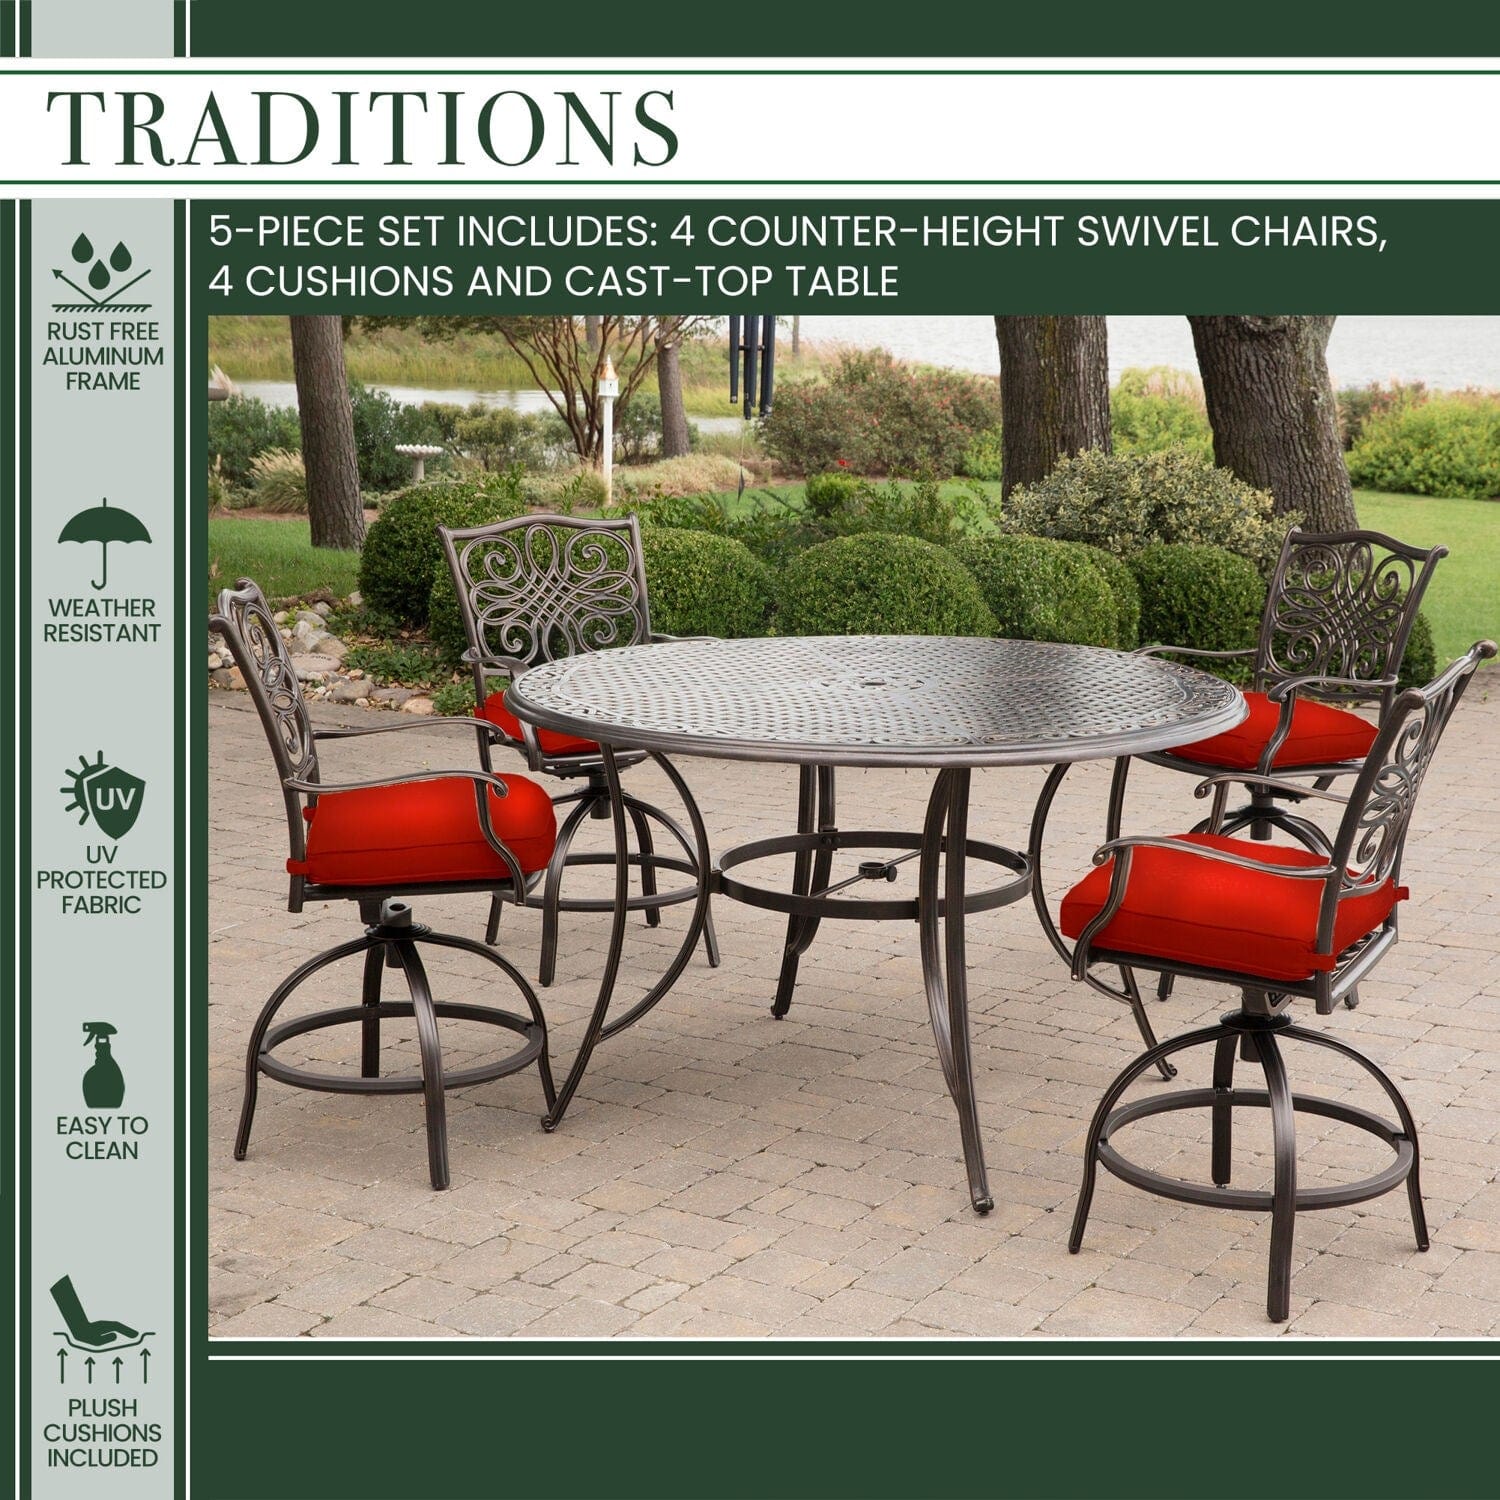 Hanover Outdoor Dining Set Hanover - Traditions 5-Piece High-Dining Set in Red with Four Swivel Chairs and a 56 In. Cast-top Table | TRADDN5PCBR-RED